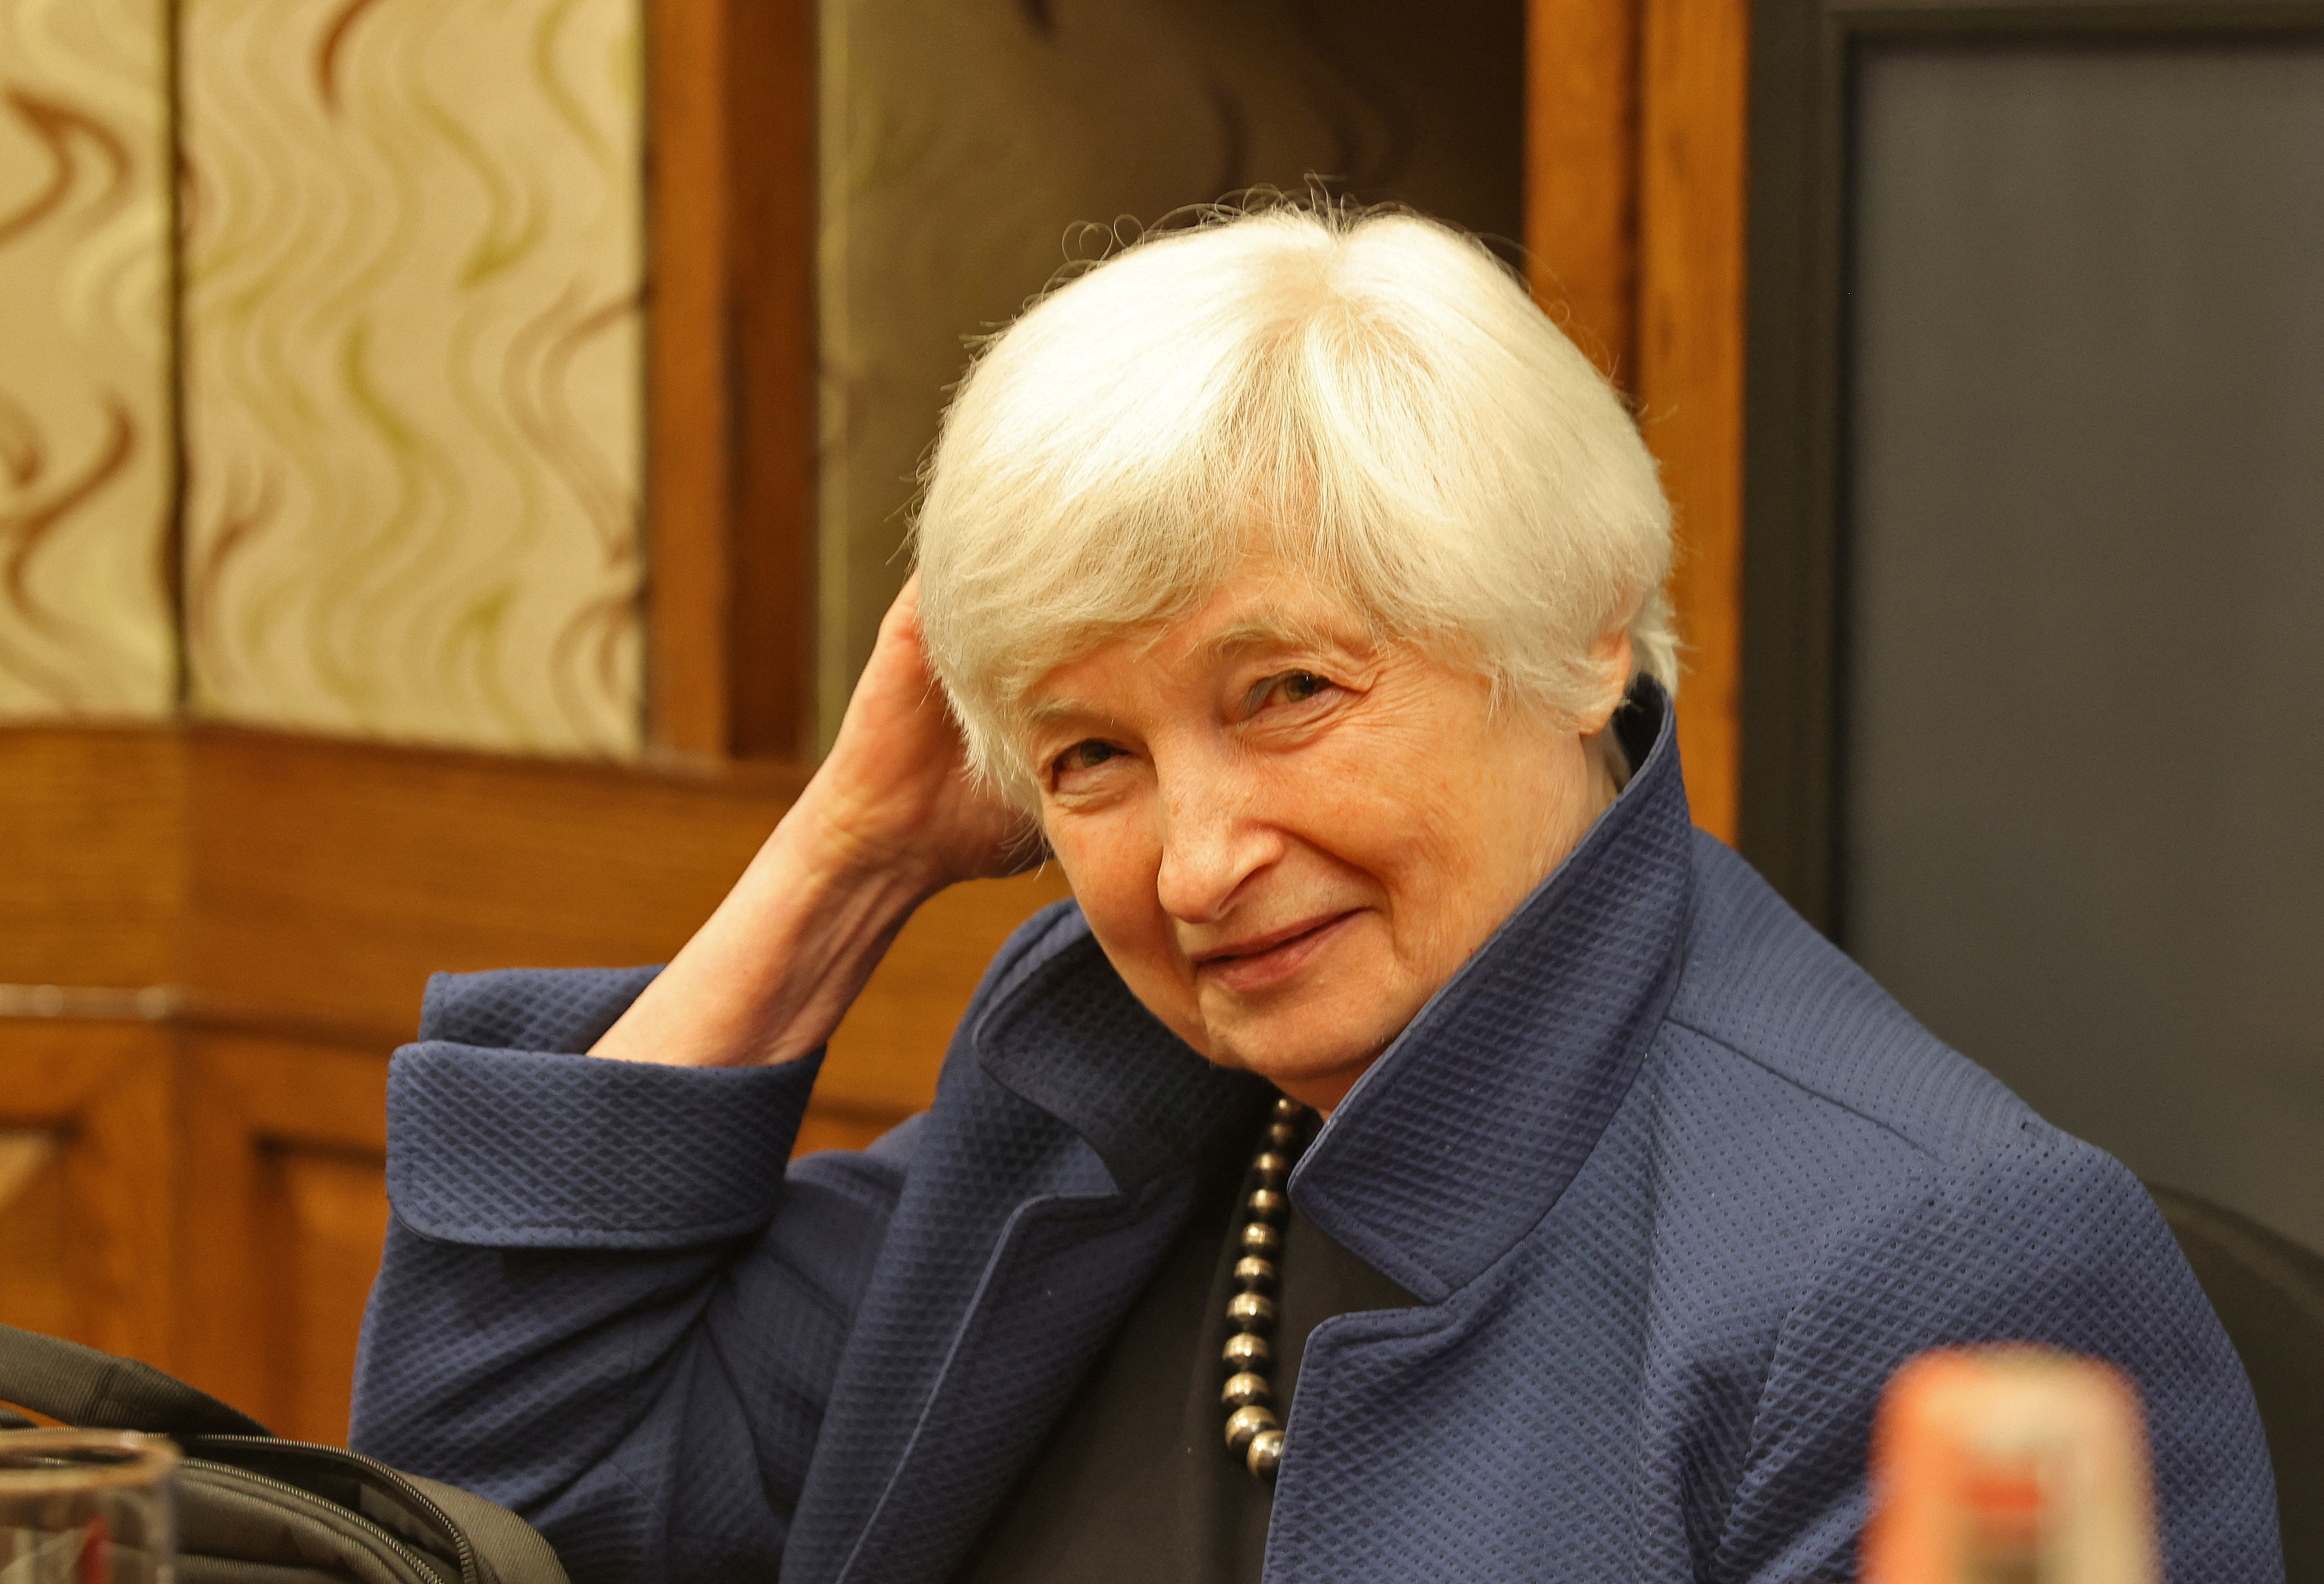 US Treasury Secretary Janet Yellen in an interview with Reuters in New Delhi